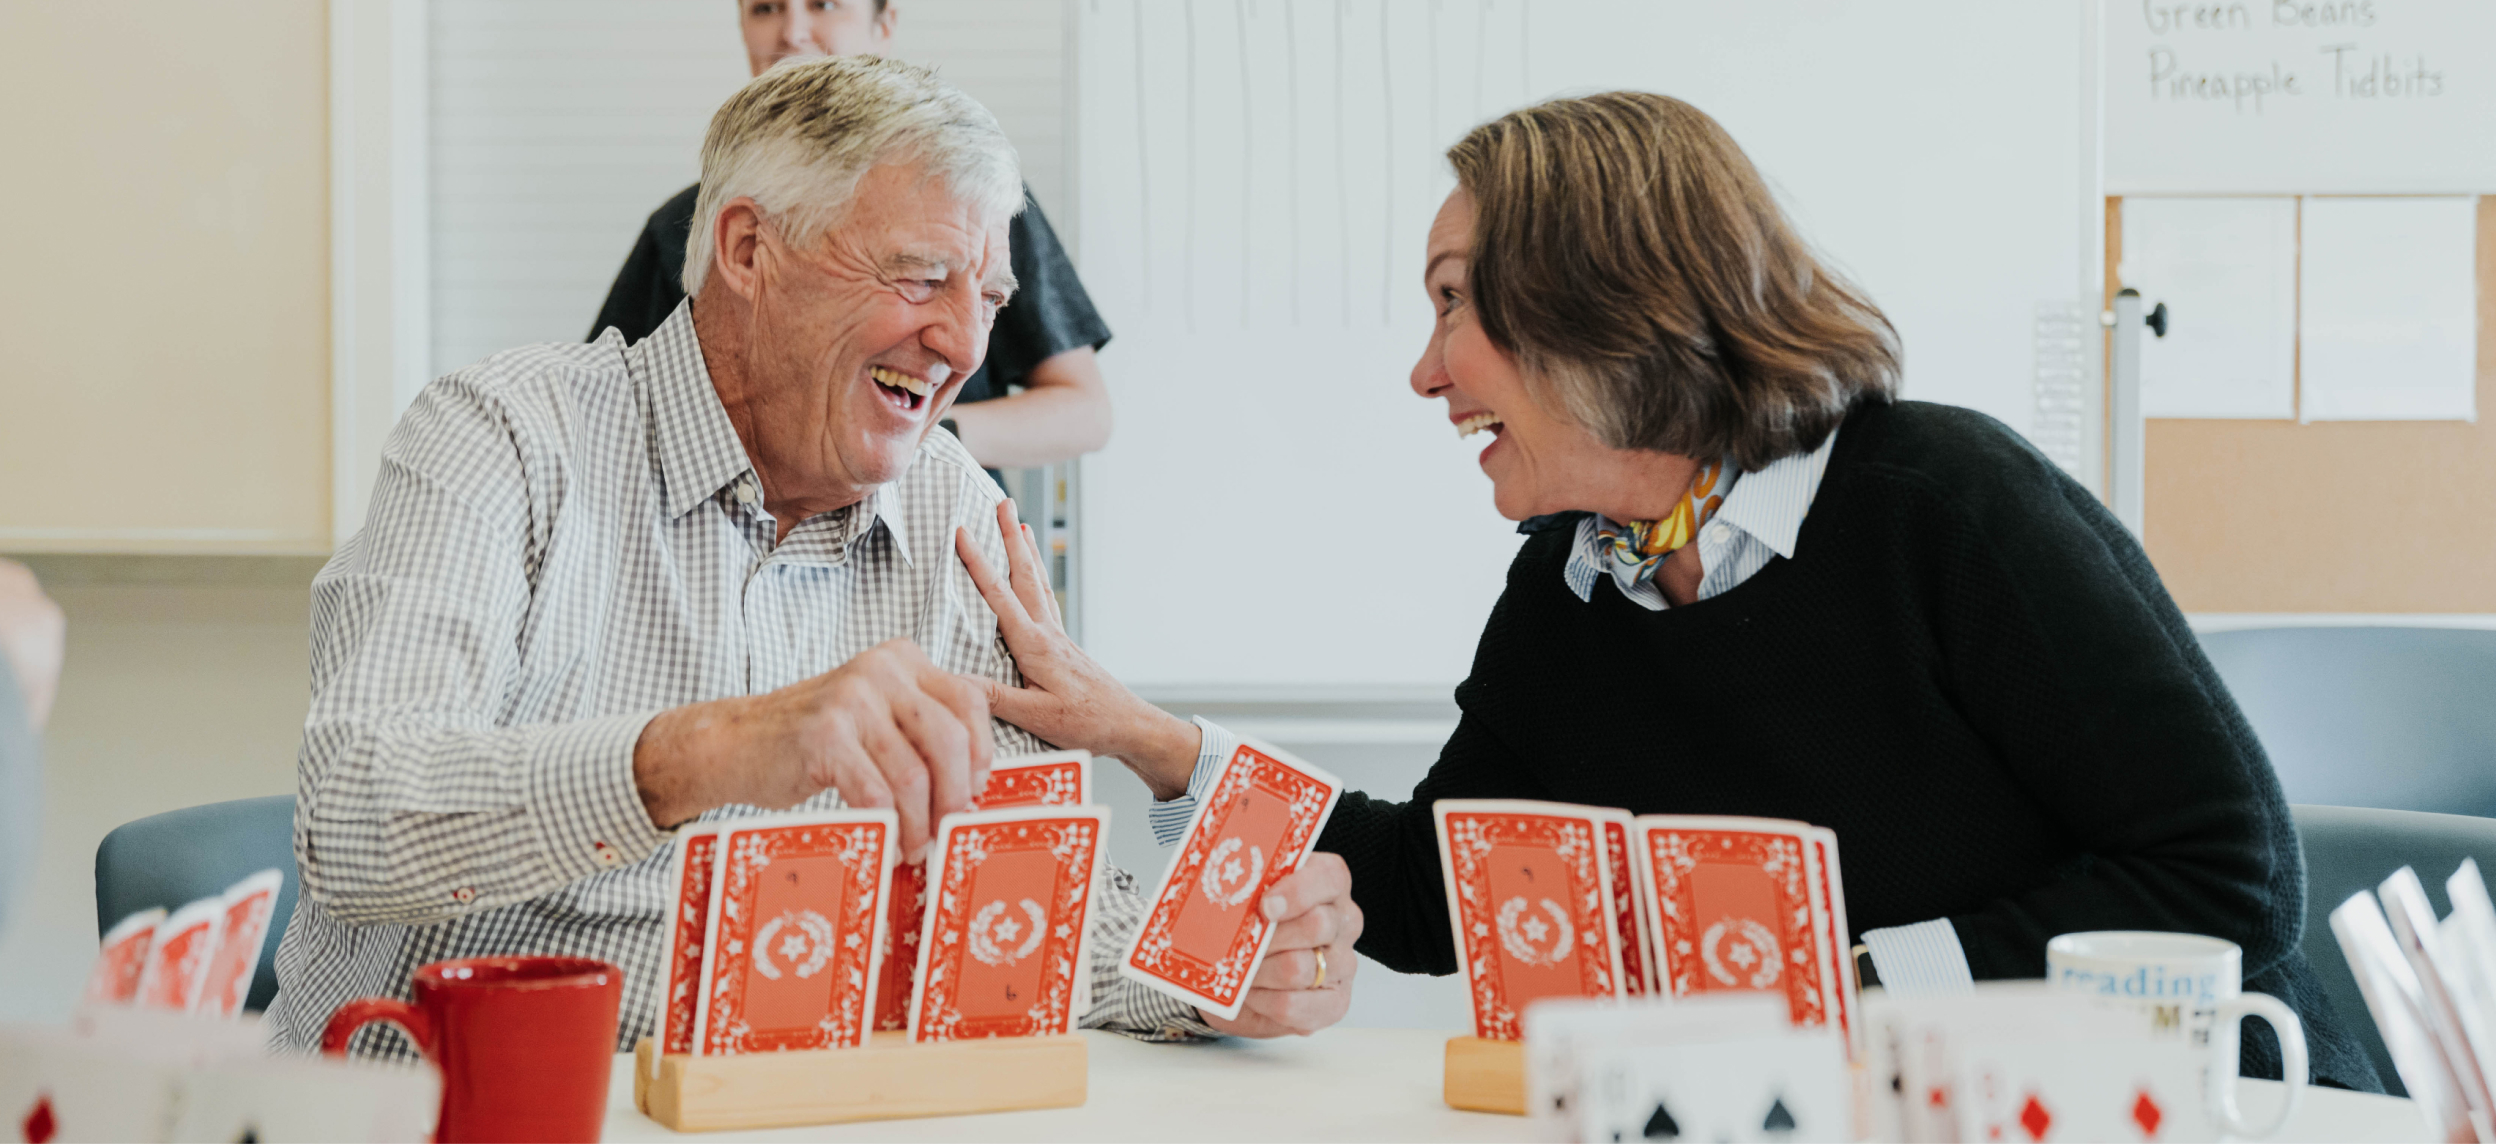 An older man and woman sit at a table playing oversized cards as they laugh together and the woman's hand is on his shoulder.